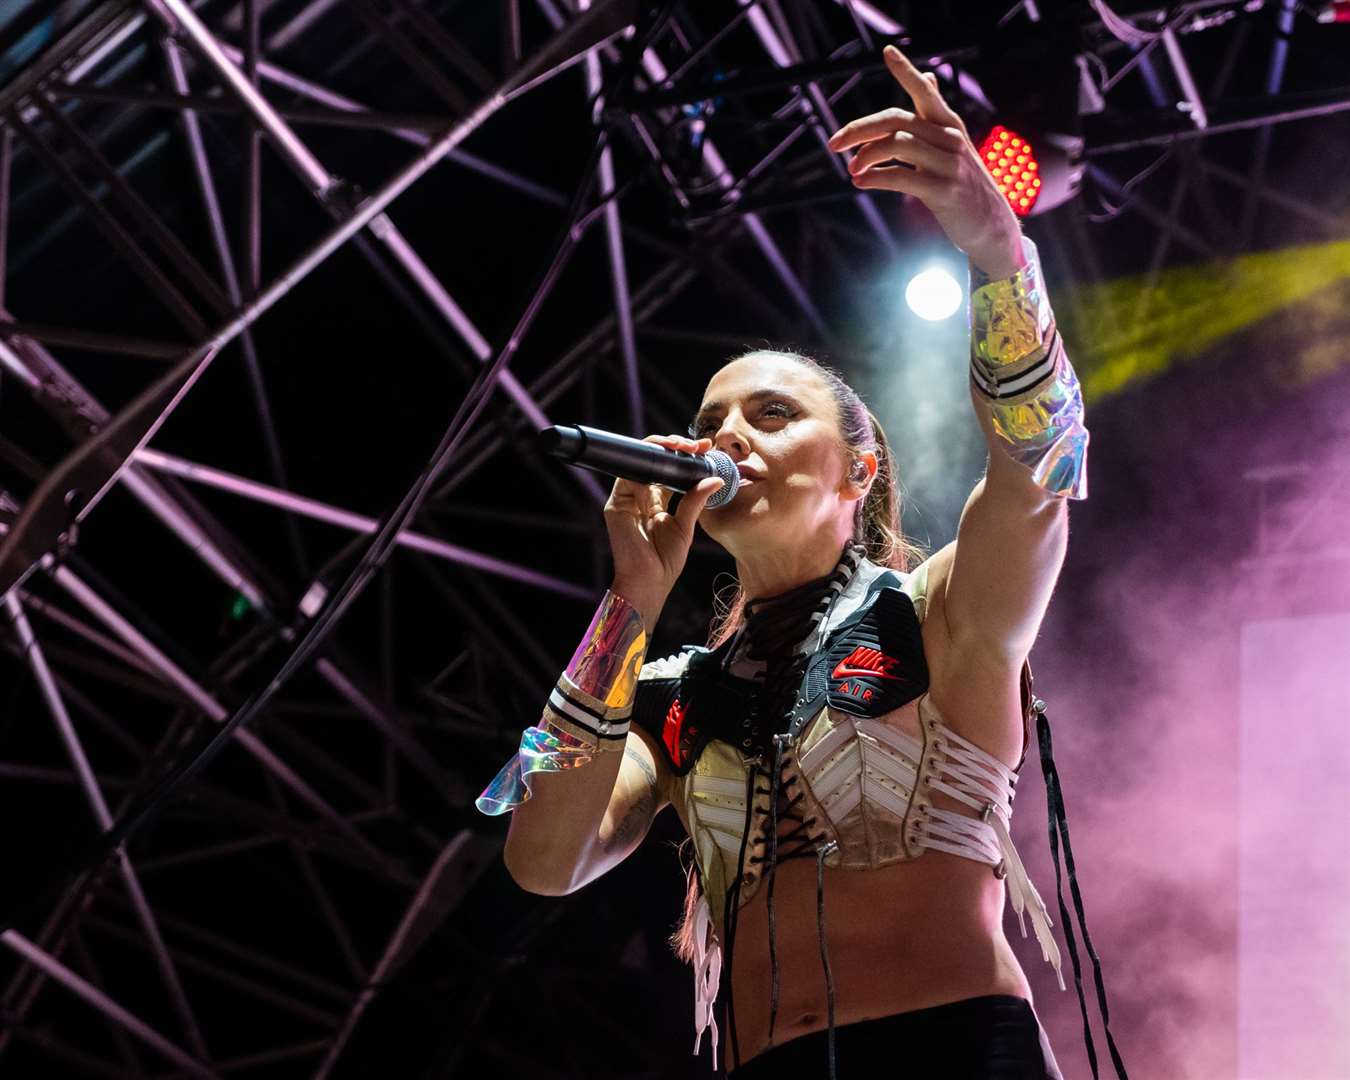 Melanie C in concert in the county in 2019 at Dreamland Picture: Dreamland Margate